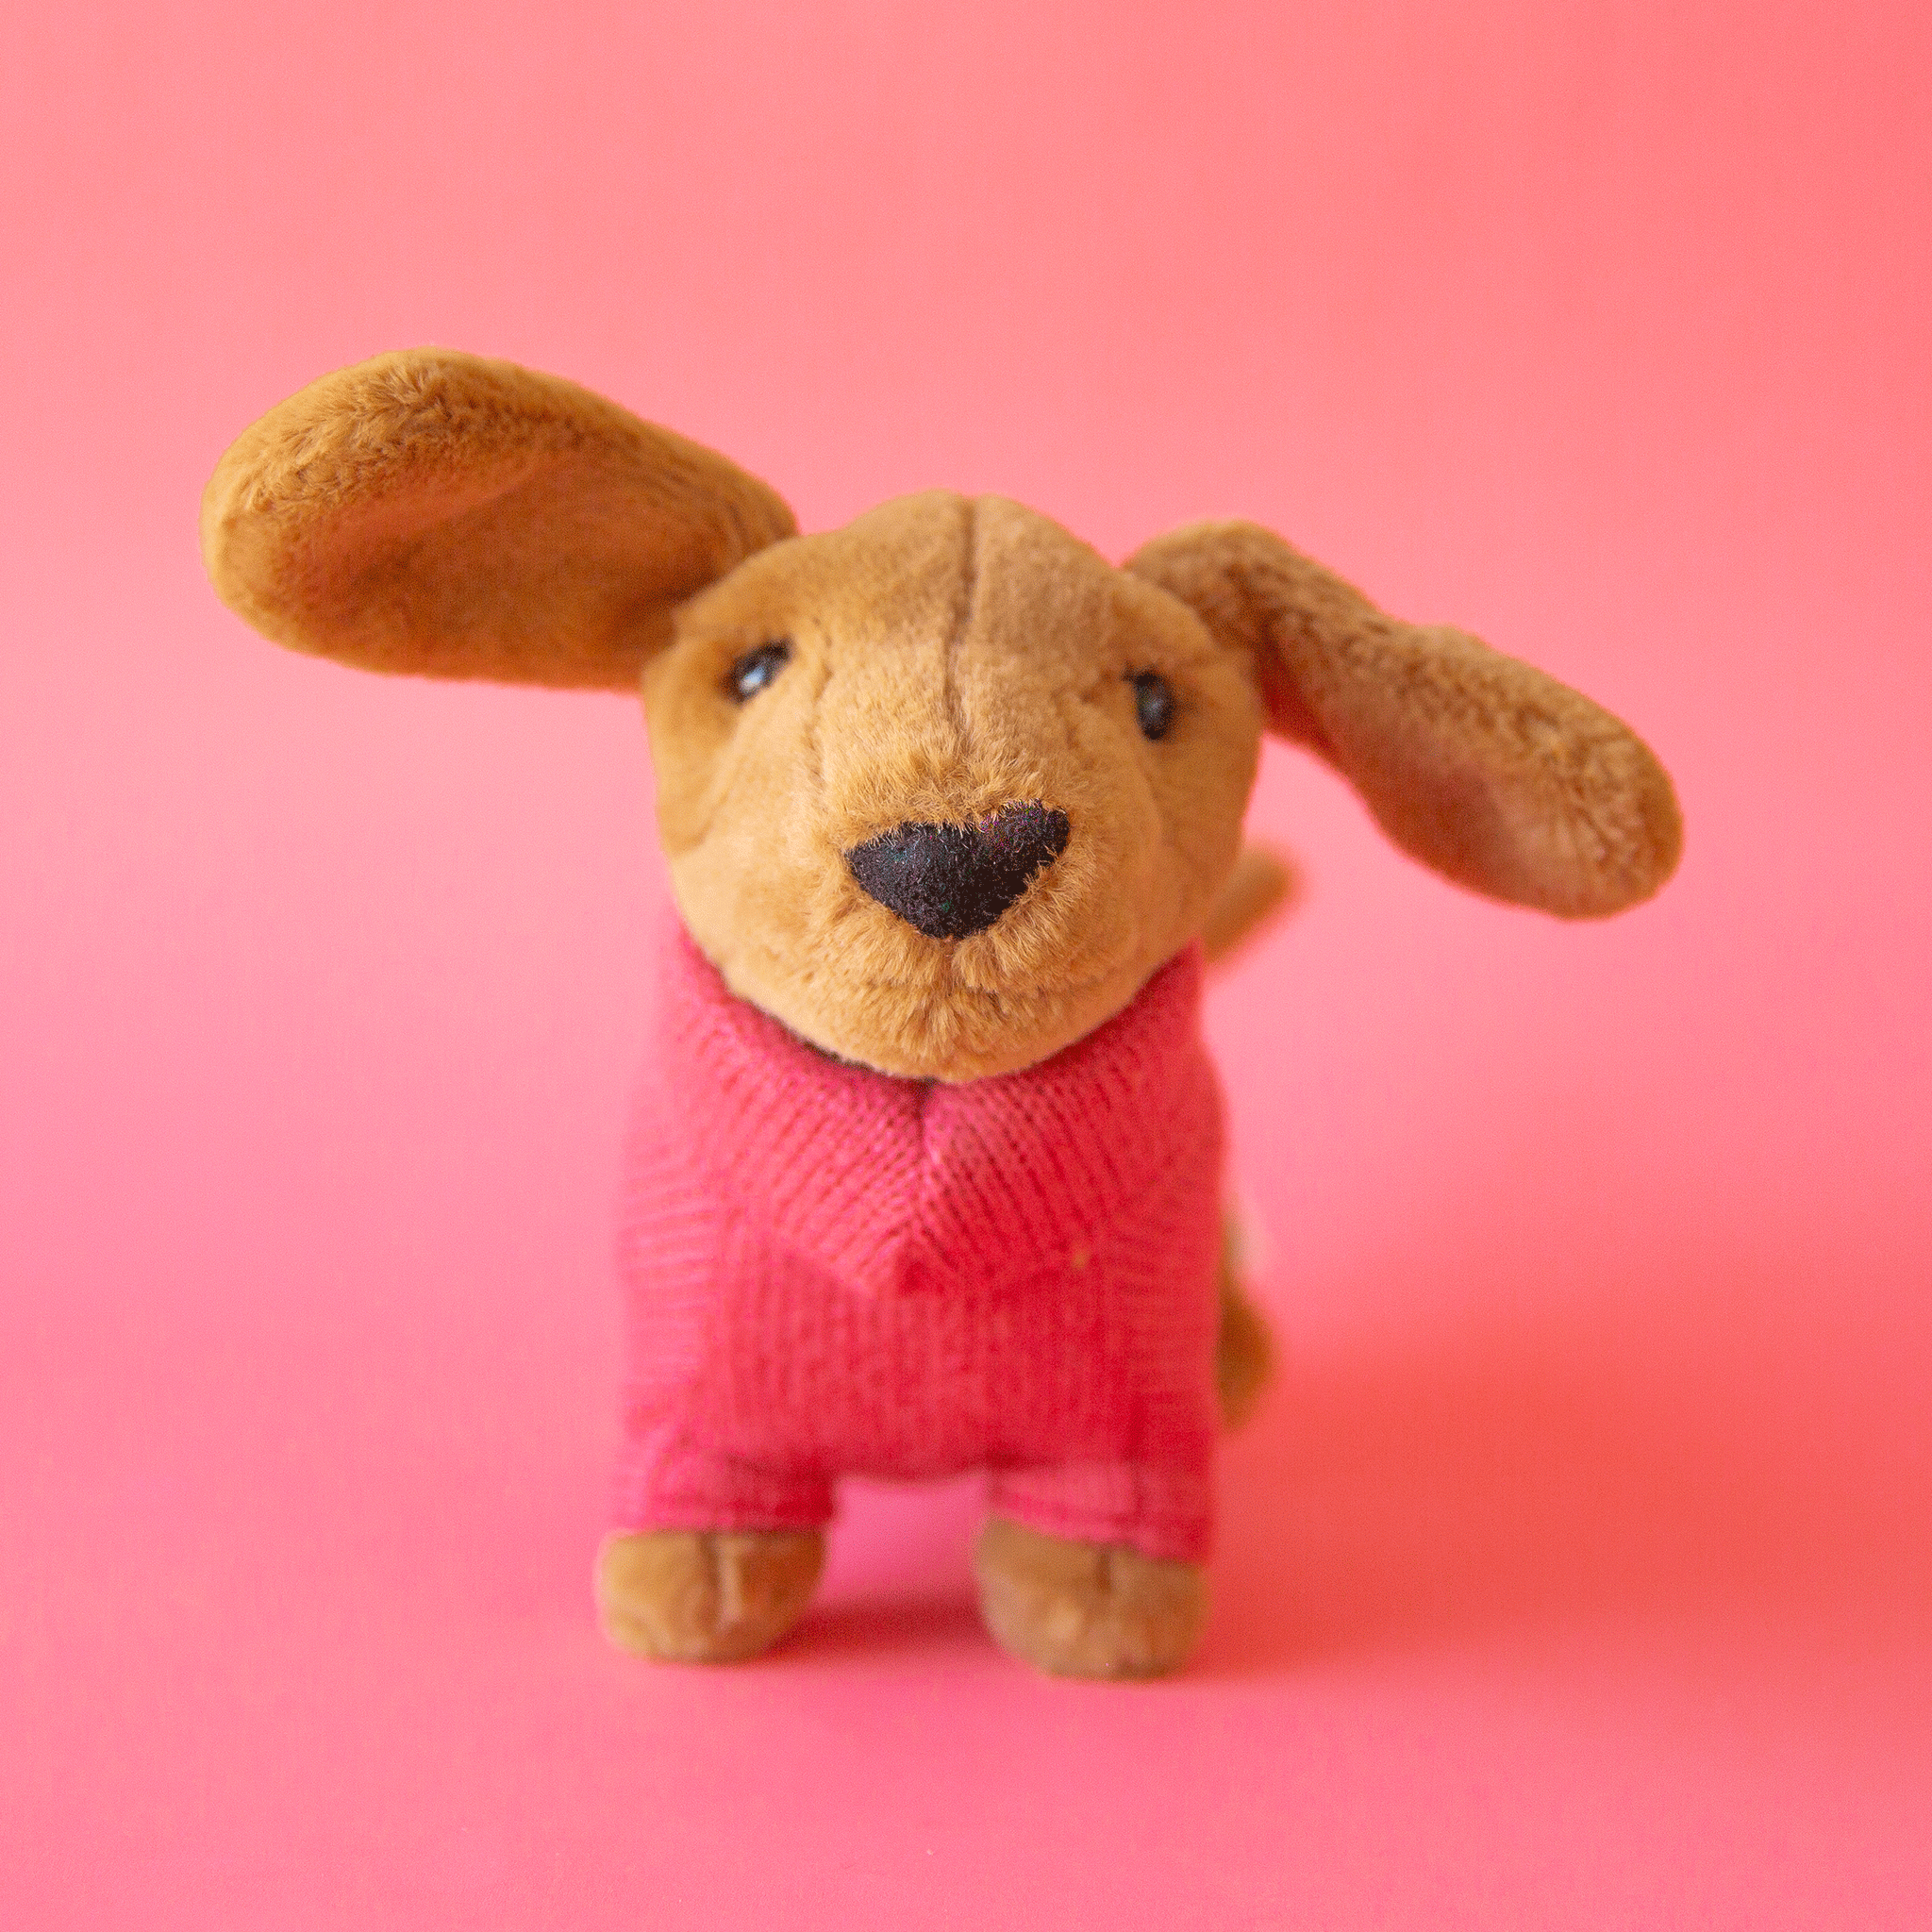 On a pink background is a tan sausage dog stuffed animal wearing a pink sweater.